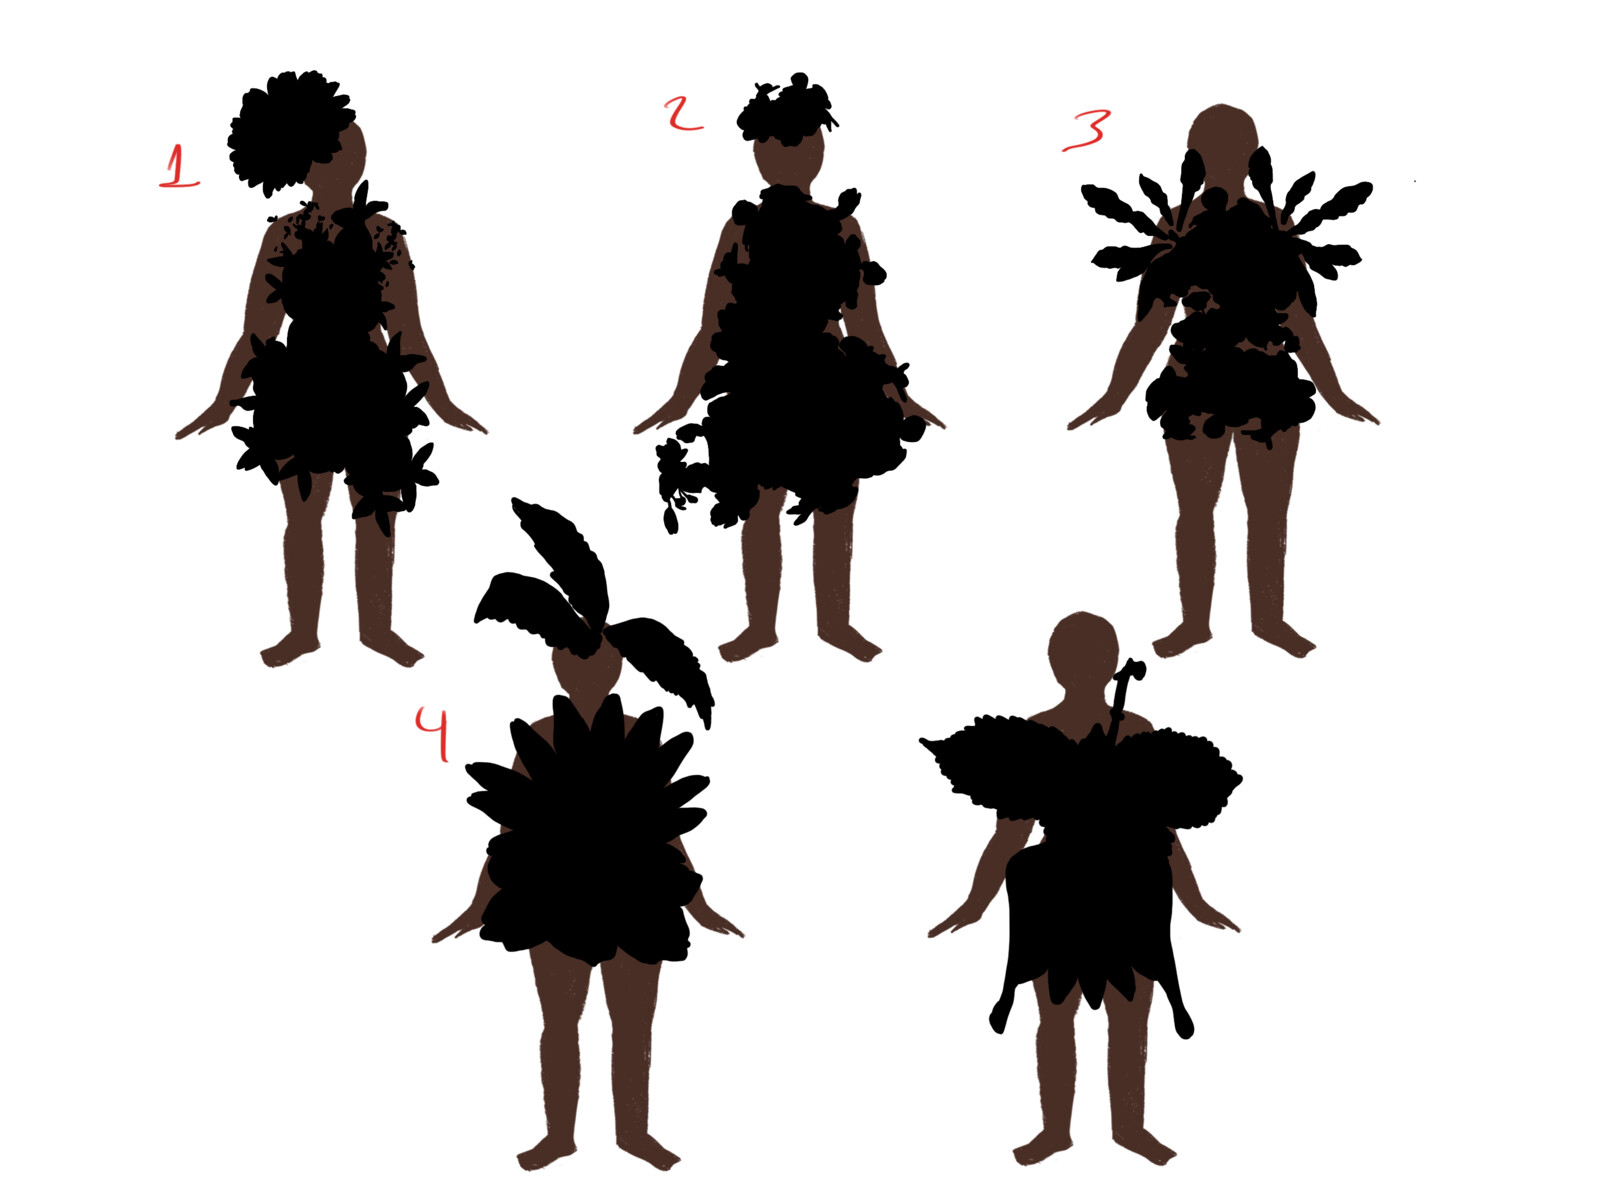 Experimentation with flower imagery and shape language for the Fairy form.